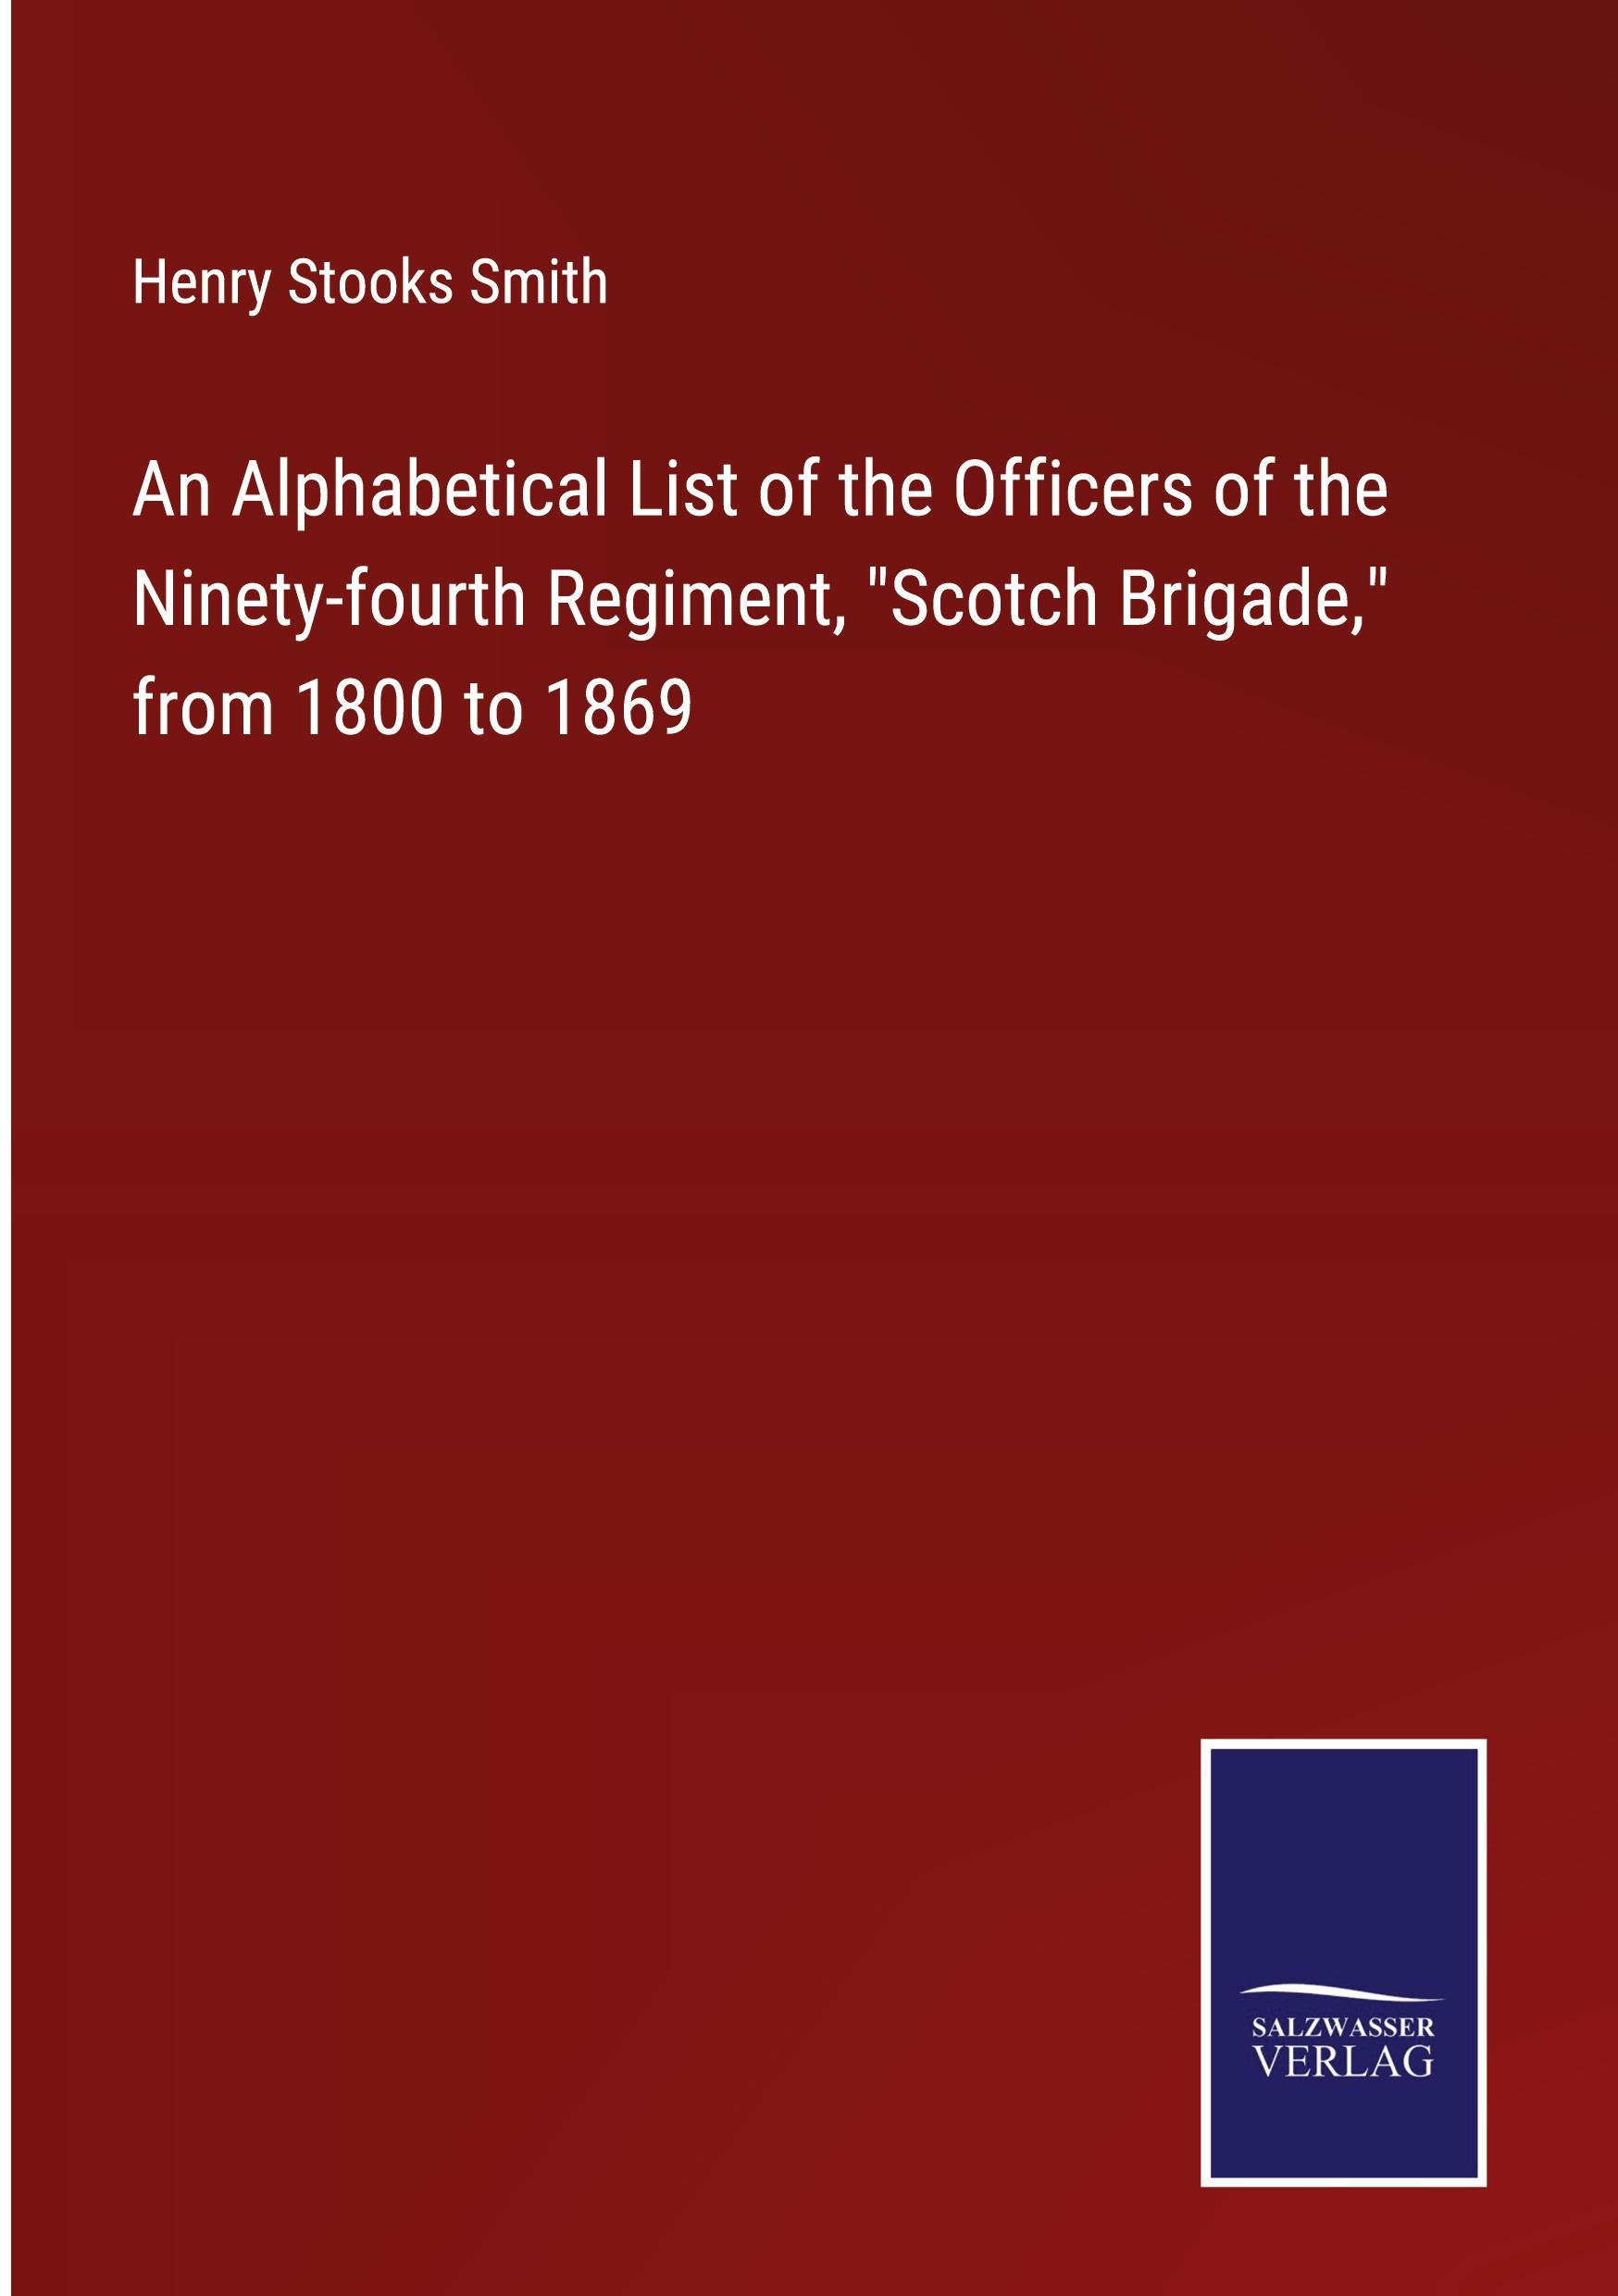 An Alphabetical List of the Officers of the Ninety-fourth Regiment, "Scotch Brigade," from 1800 to 1869